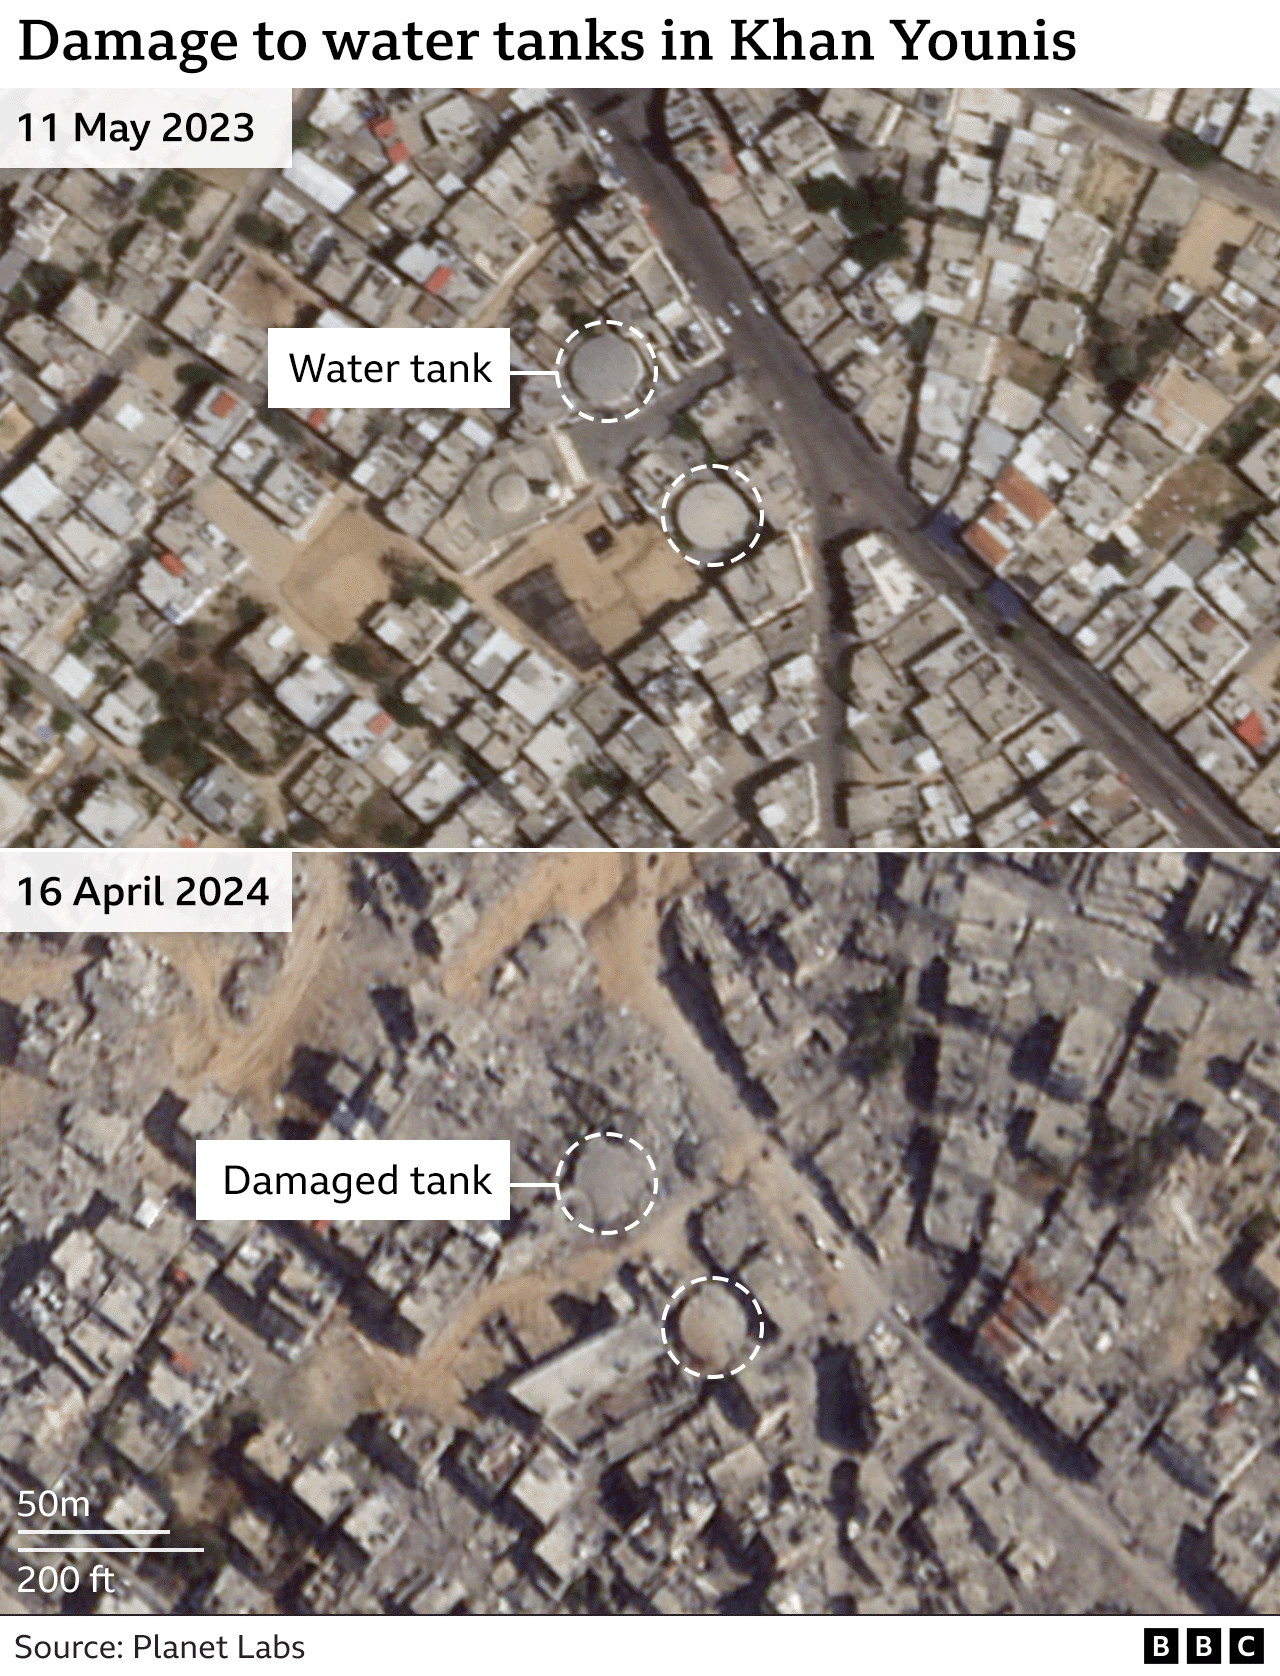 A 'before' and 'after' satellite photo showing damage to water tanks in Khan Younis from 11 May 2023 and 16 April 2024